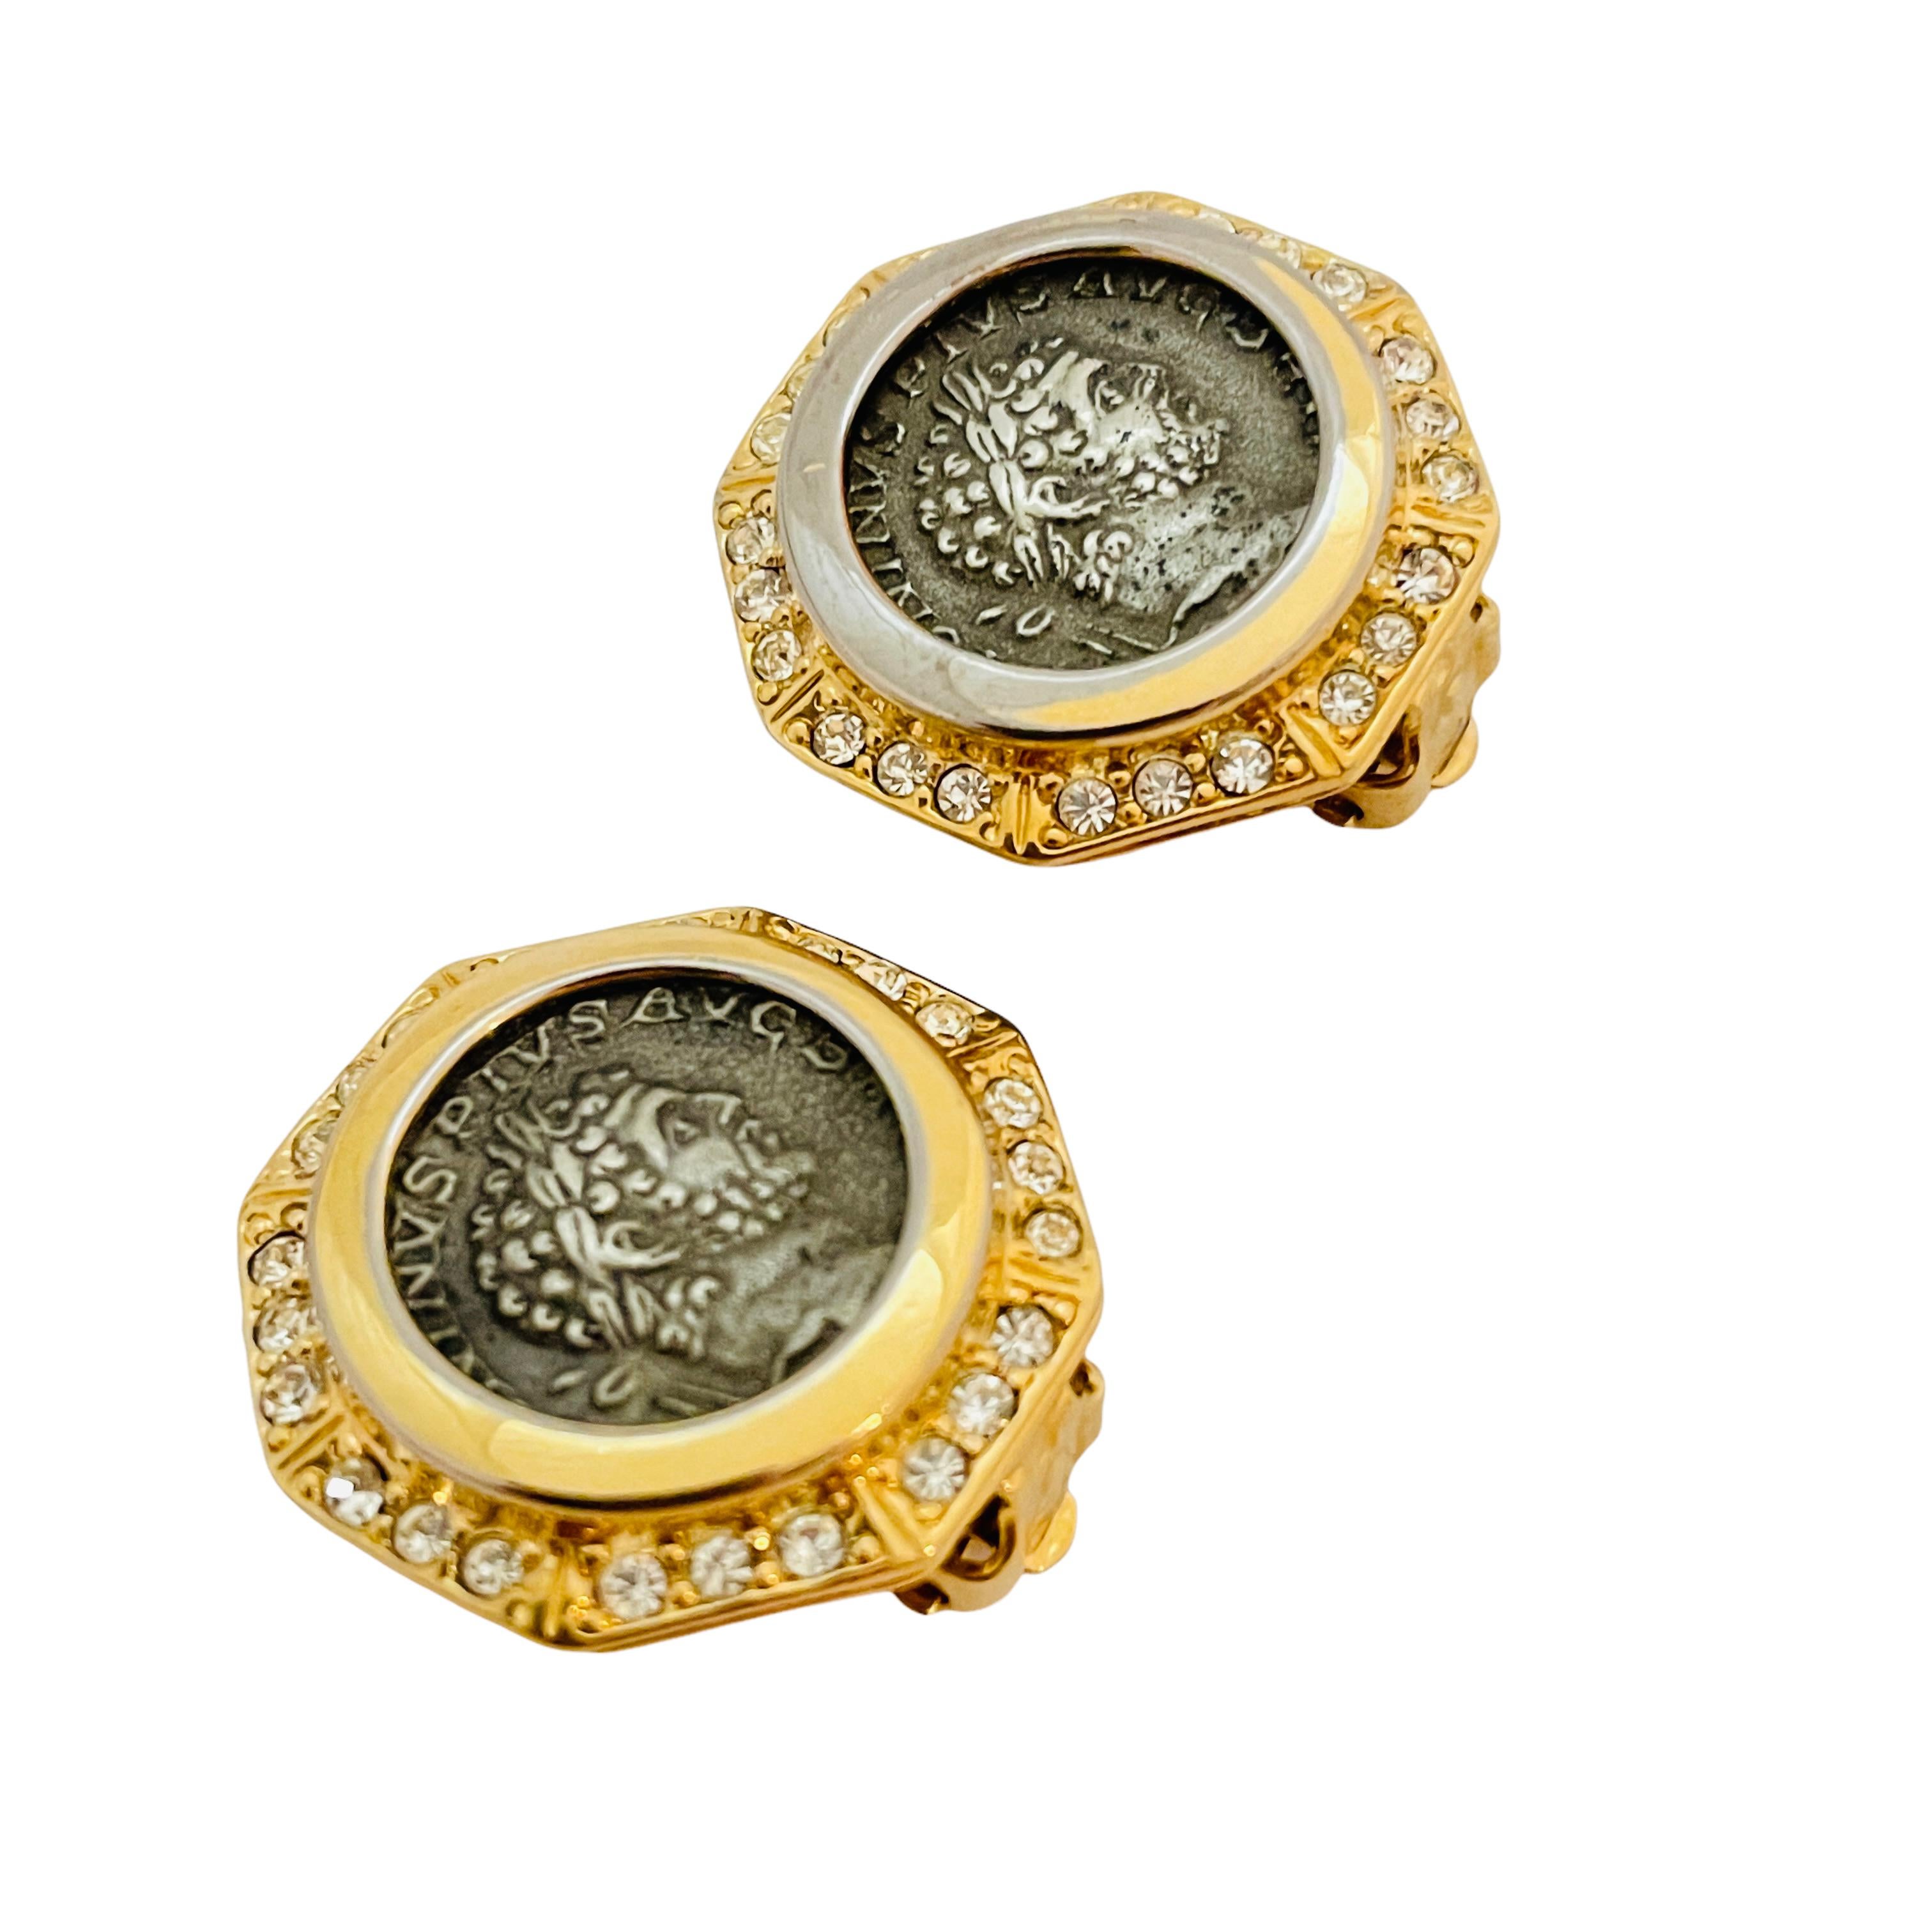 DETAILS

• signed CAROLEE

• gold tone with silver coin and rhinestones

• vintage designer runway earrings

MEASUREMENTS

• 0.88